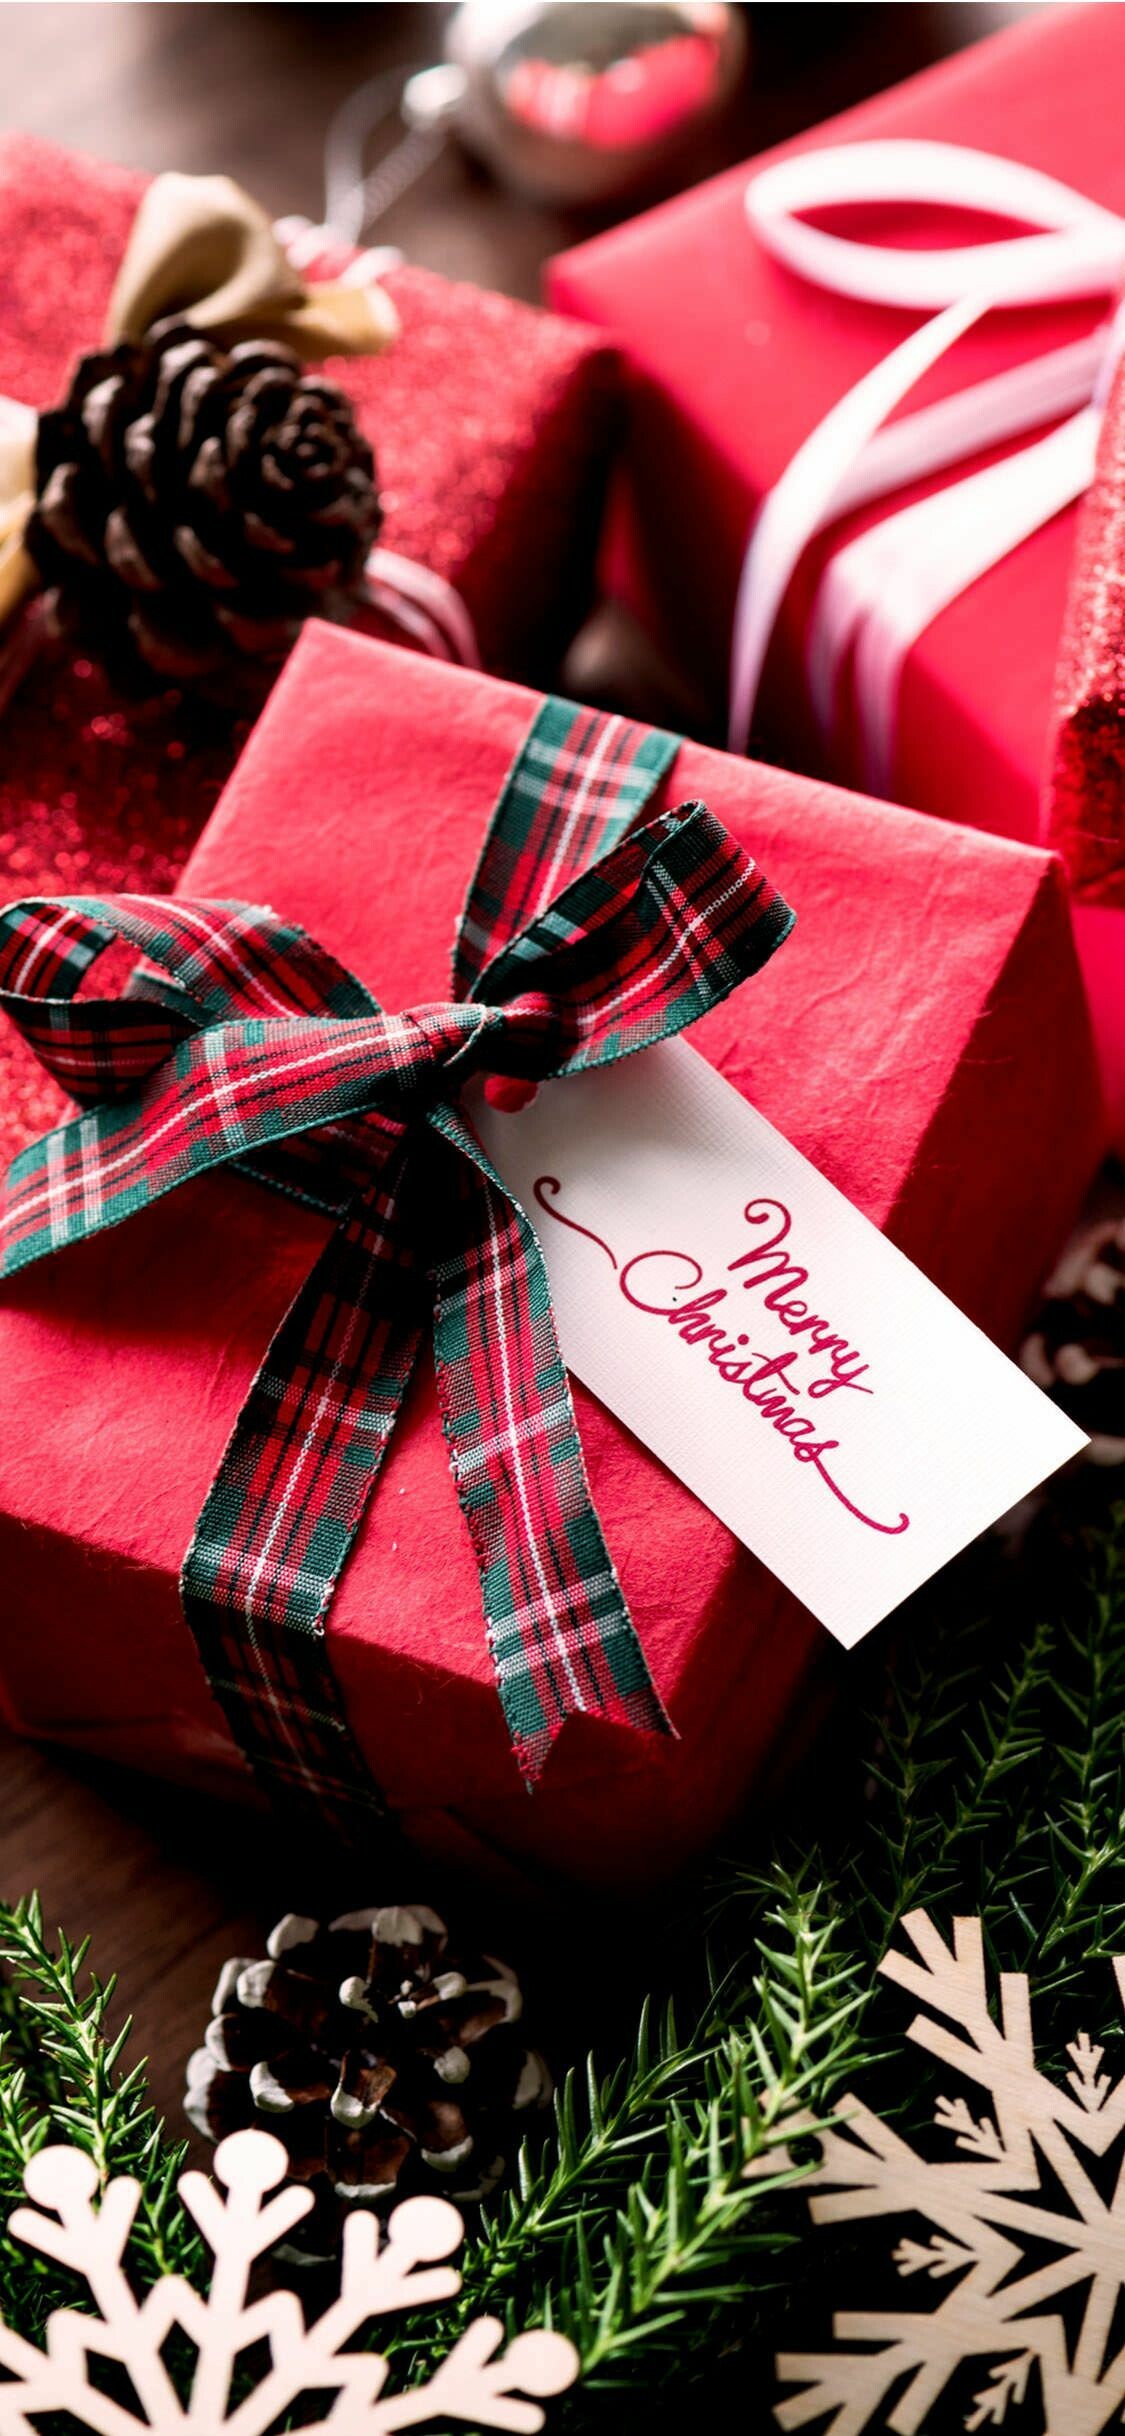 Christmas Gifts: A present given at winter holiday, Wrapper paper, Feast. 1130x2440 HD Wallpaper.